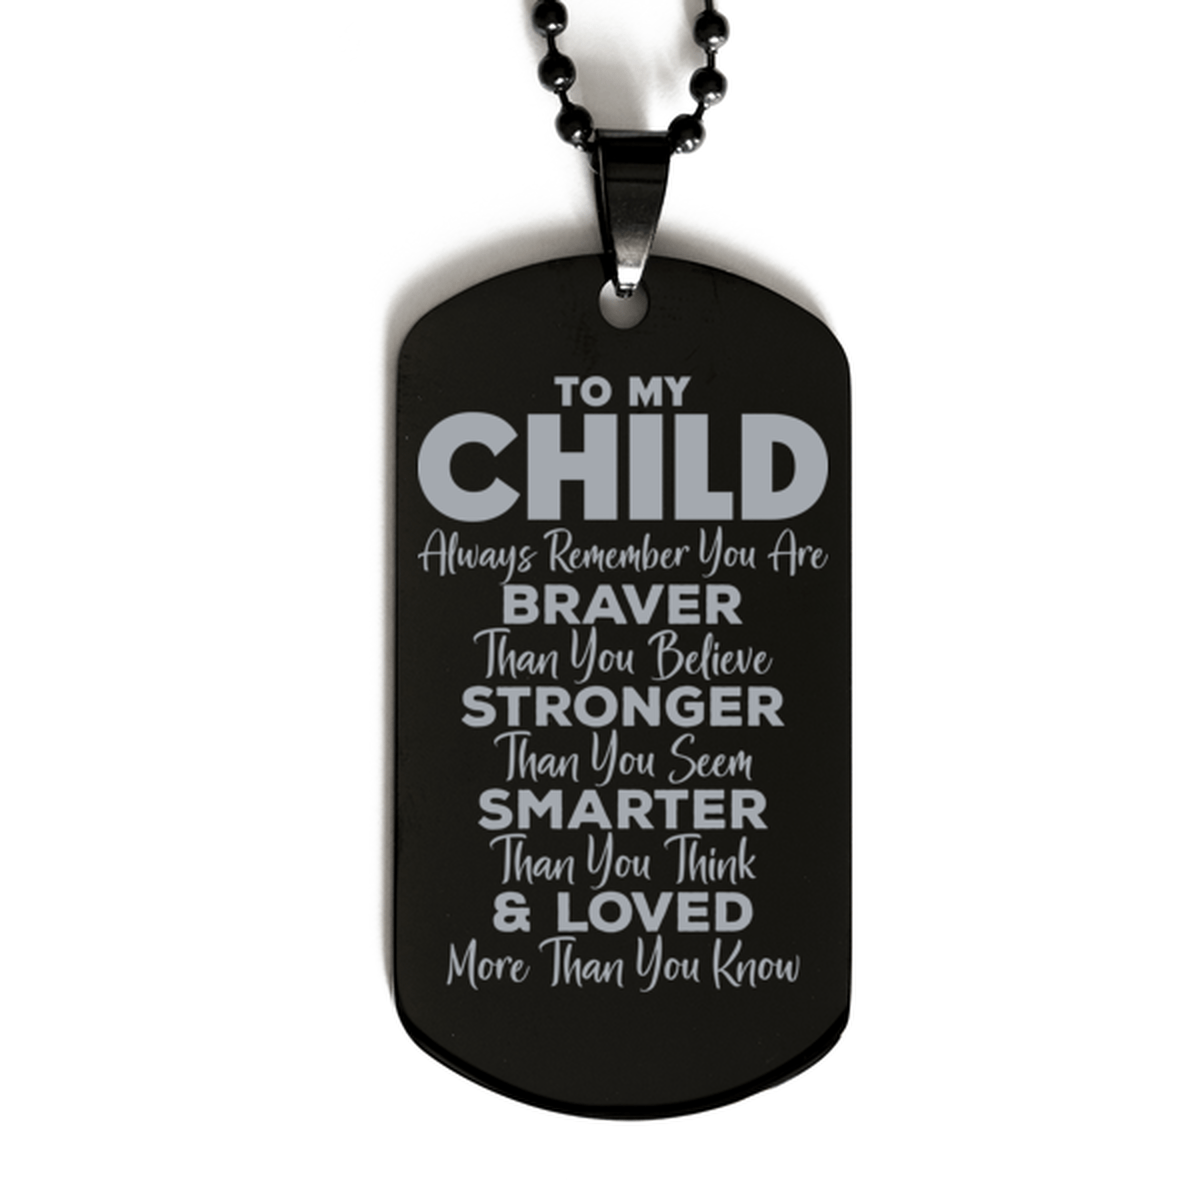 Motivational Child Black Dog Tag Necklace, Child Always Remember You Are Braver Than You Believe, Best Birthday Gifts for Child